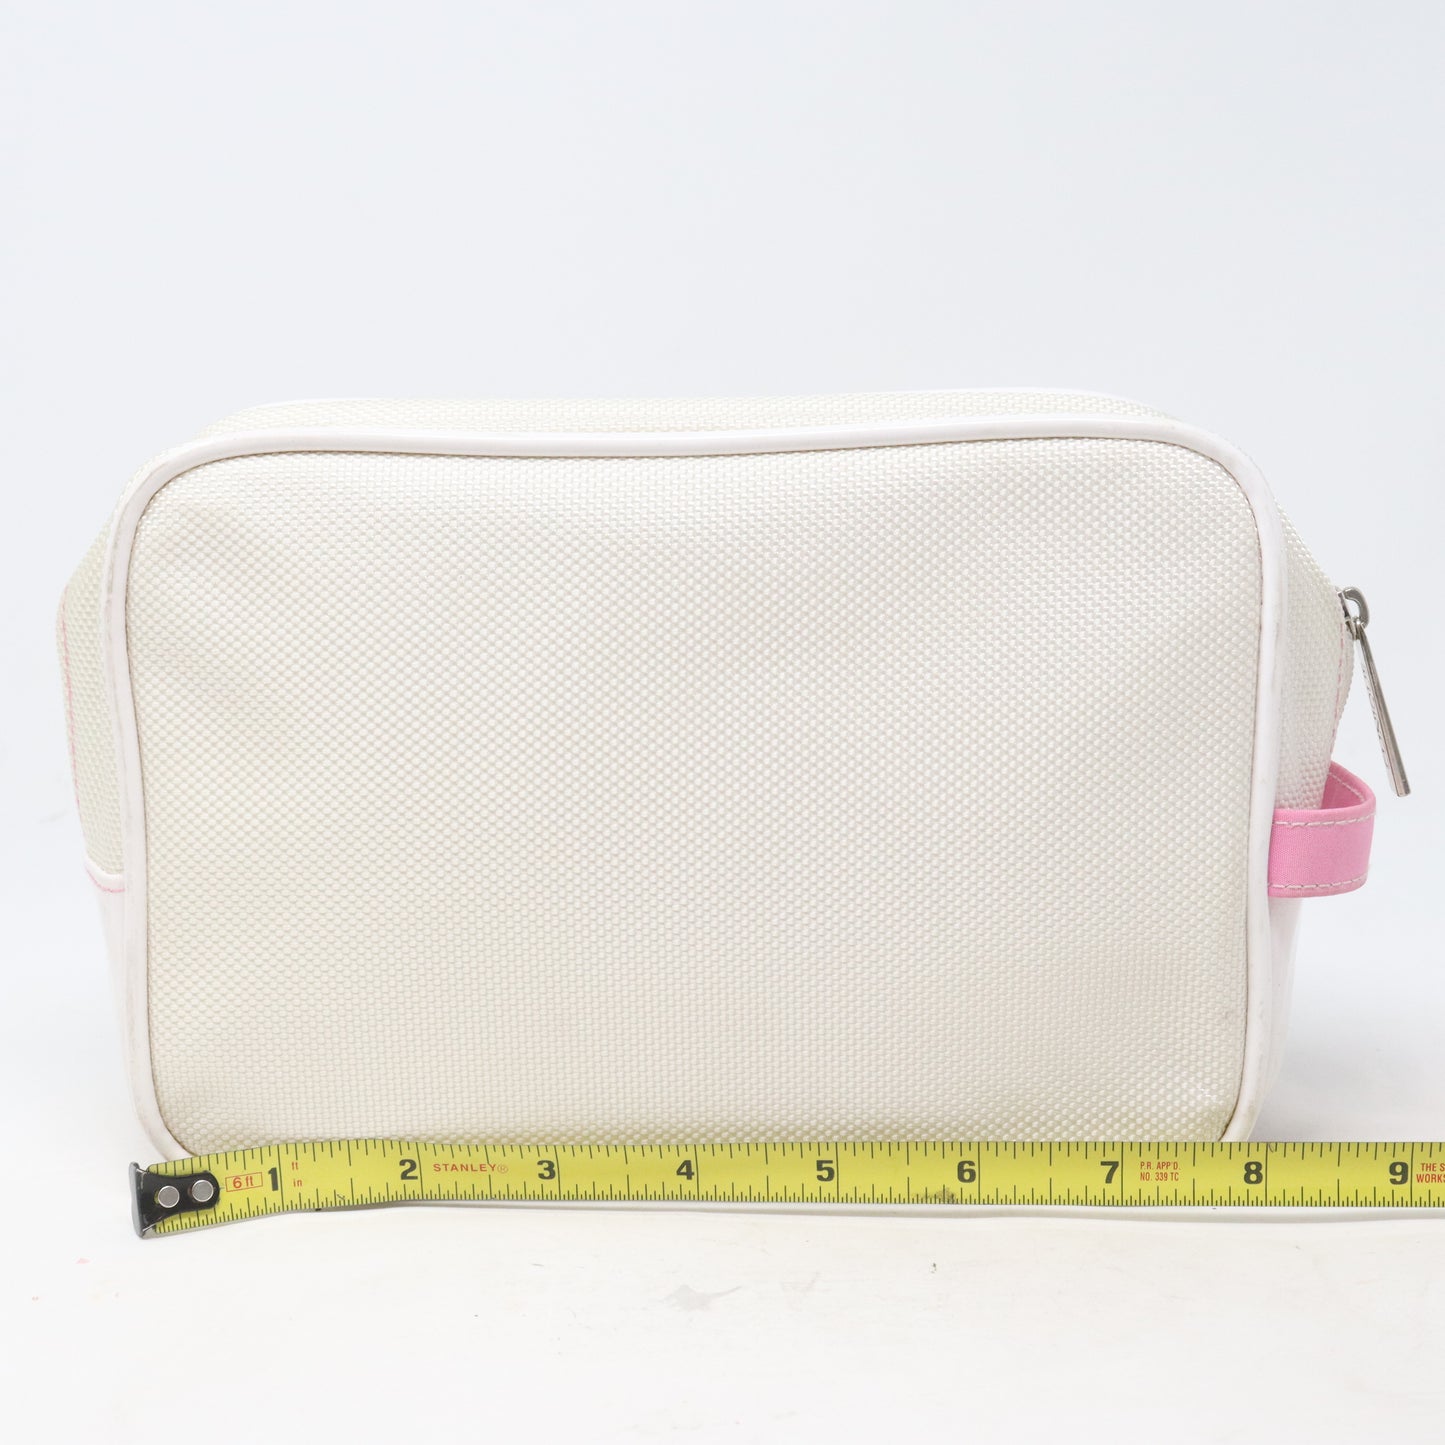 Clinique White And Pink Cosmetic Bag  / New